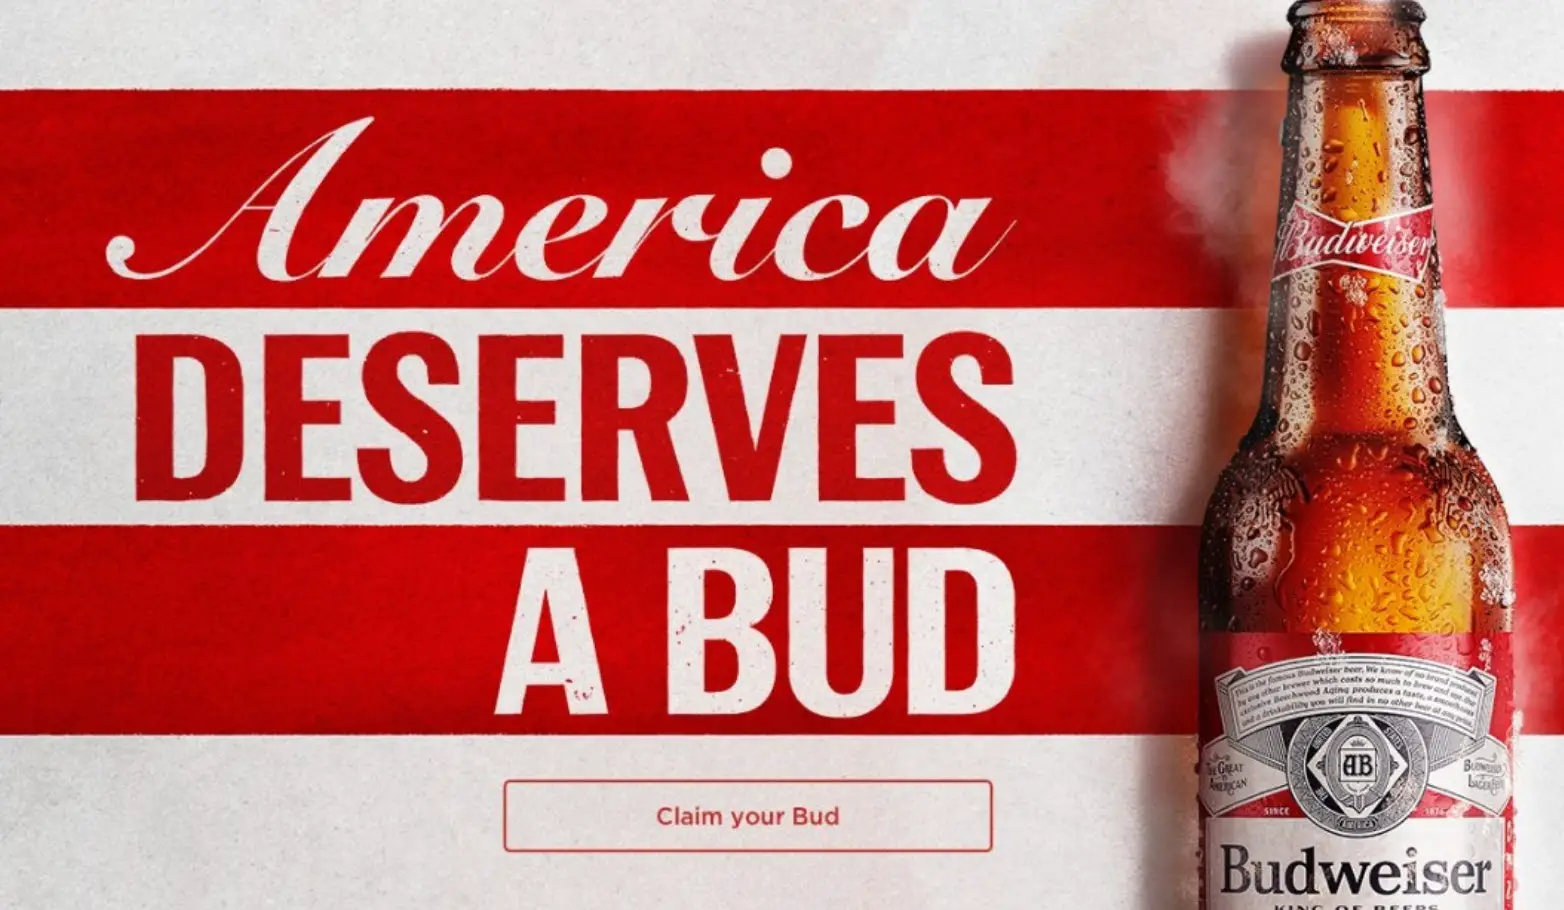 Free Beer anyone? Budweiser announced today on Twitter that everyone is getting a Free Bud on them! You get it in the form of a Virtual Prepaid Card #Budweiser #biggame #freebeer